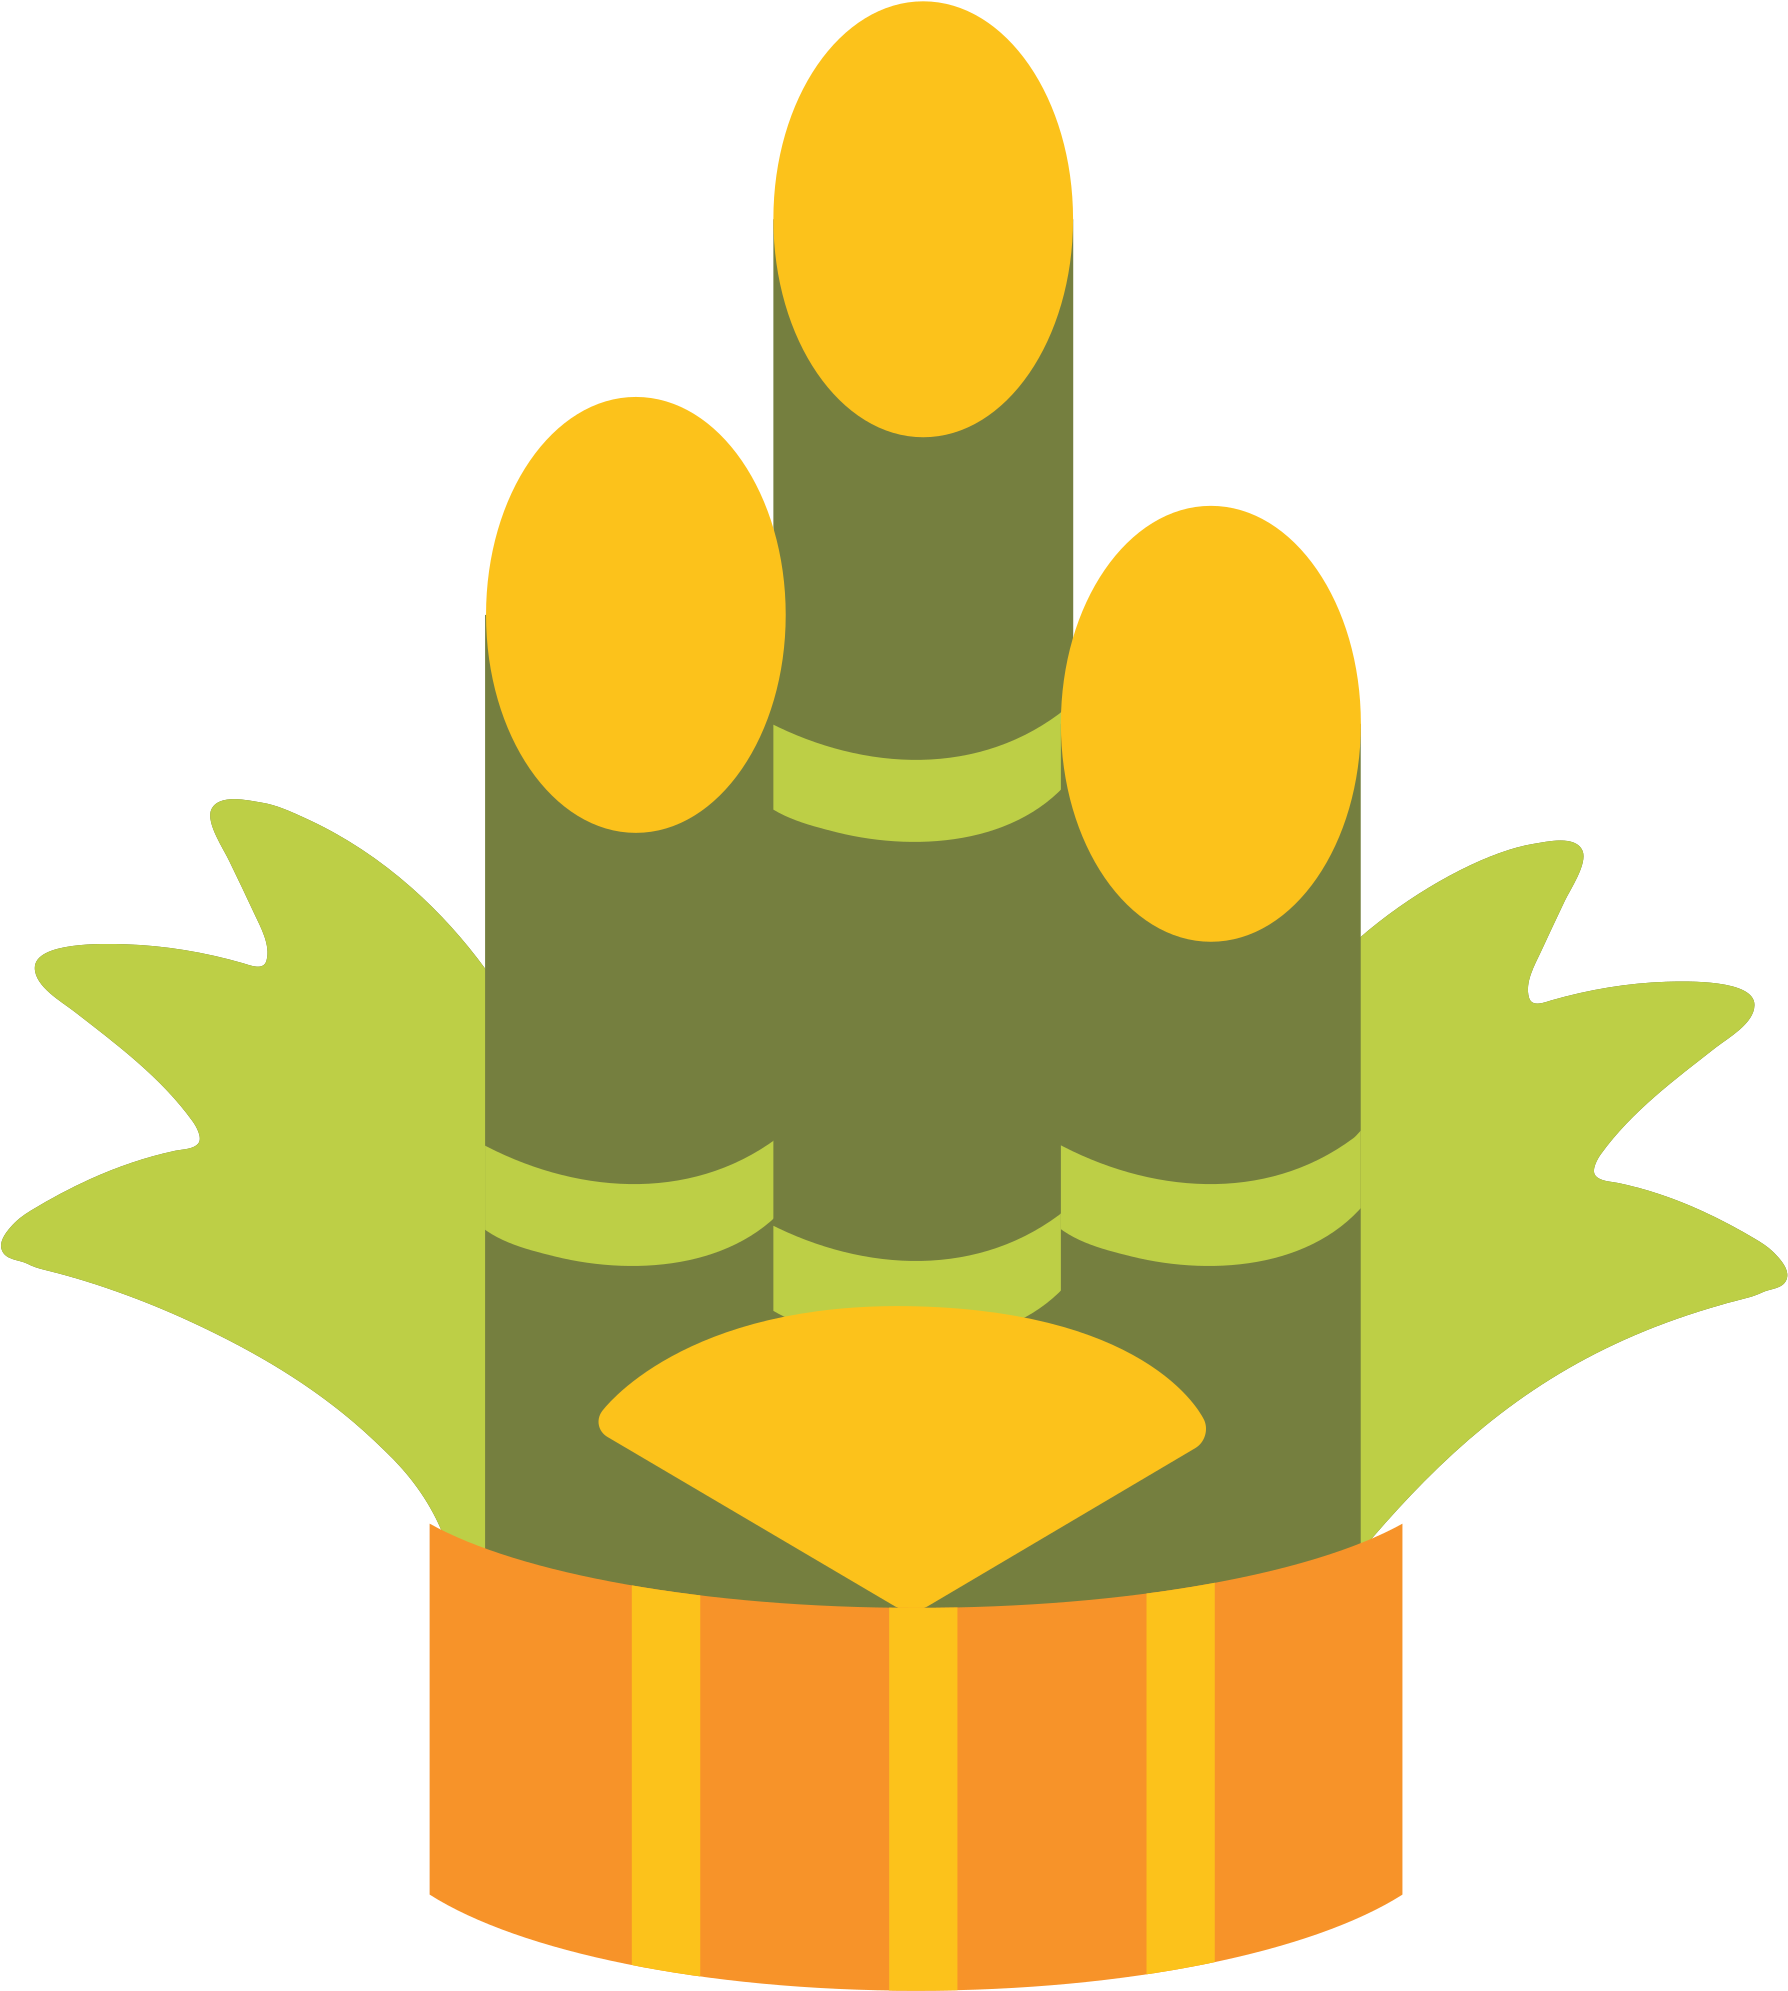 Open - Does The Cactus Emoji Mean (2000x2000)